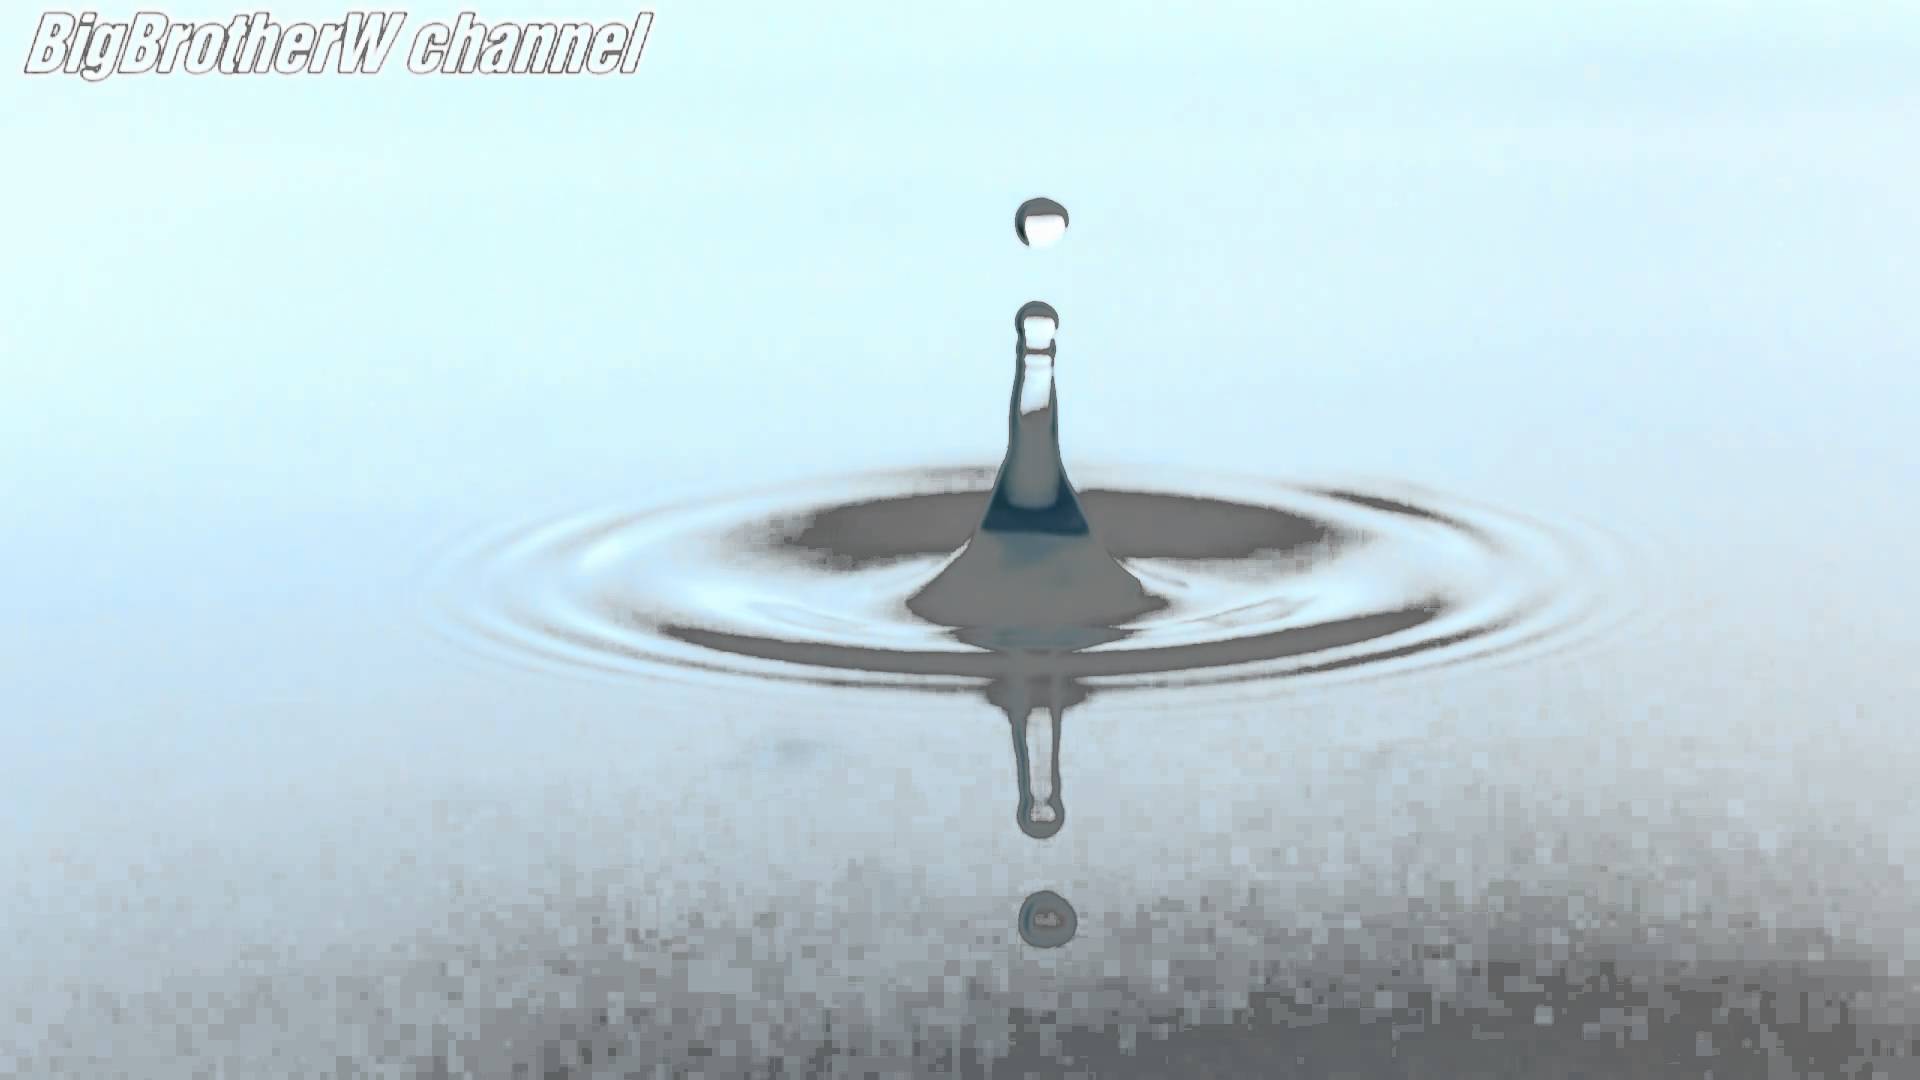 Super Slow Motion Water Drop (droplet) HD (BigBrotherW channel ...